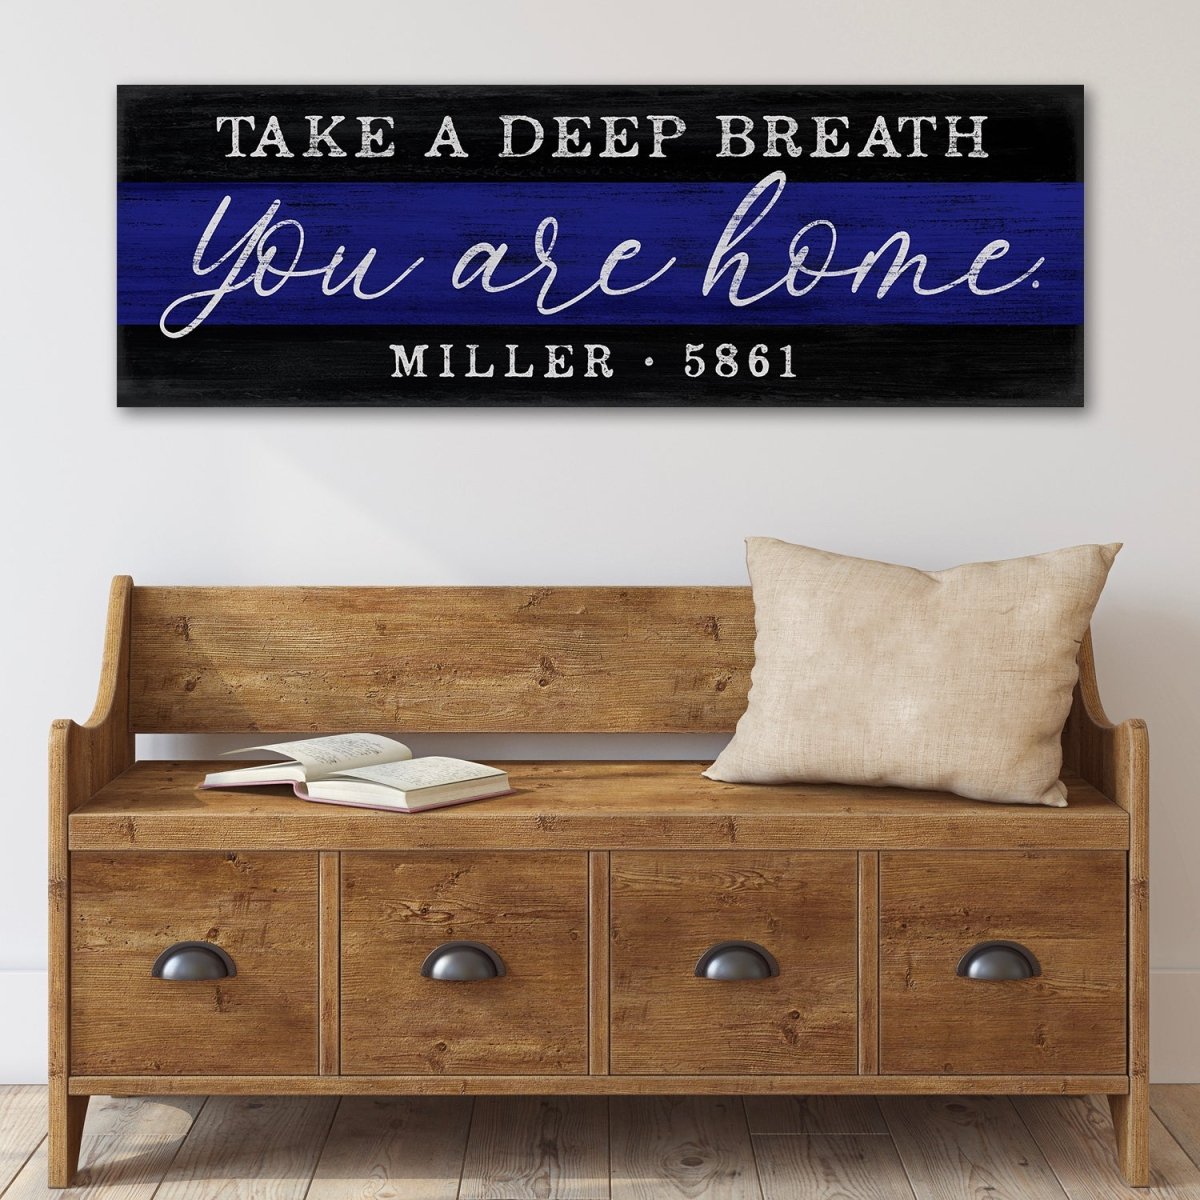 Take A Deep Breath Blue Line Sign Above Bench in Entryway - Pretty Perfect Studio